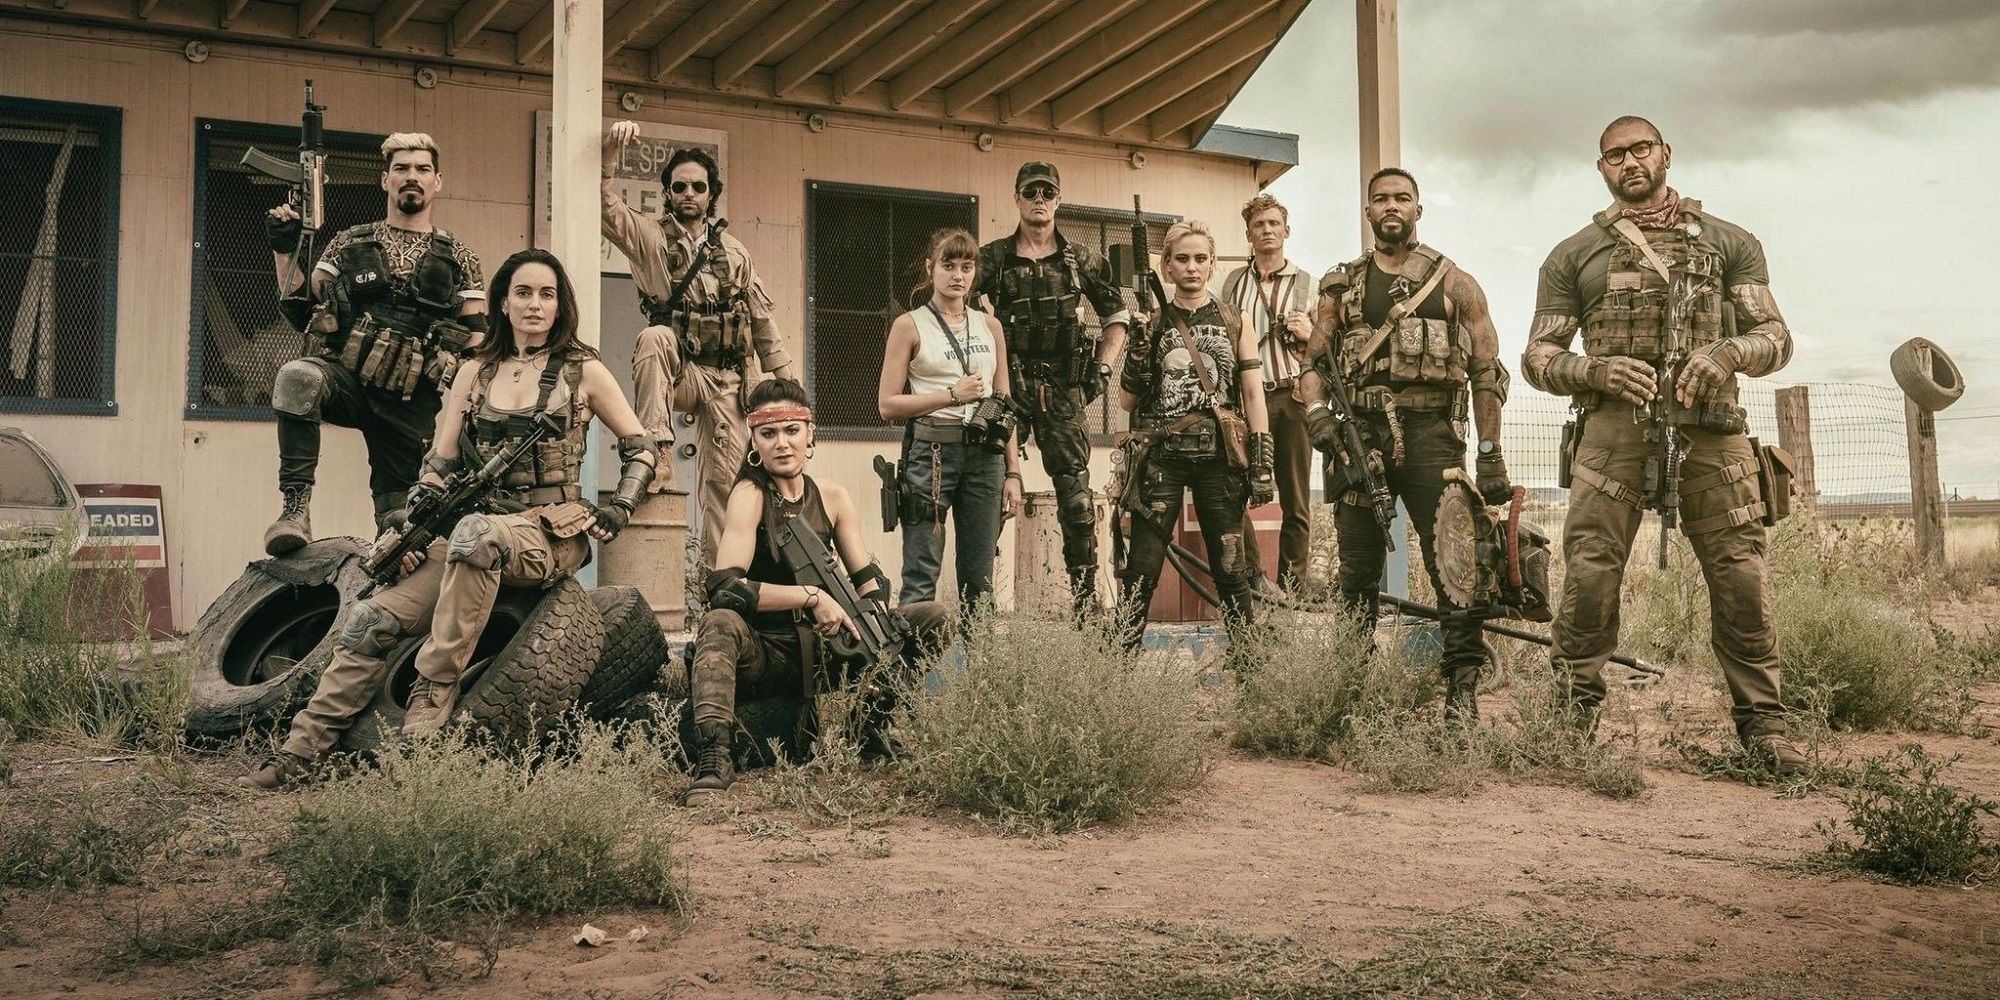 The cast of Army of the Dead armed with guns